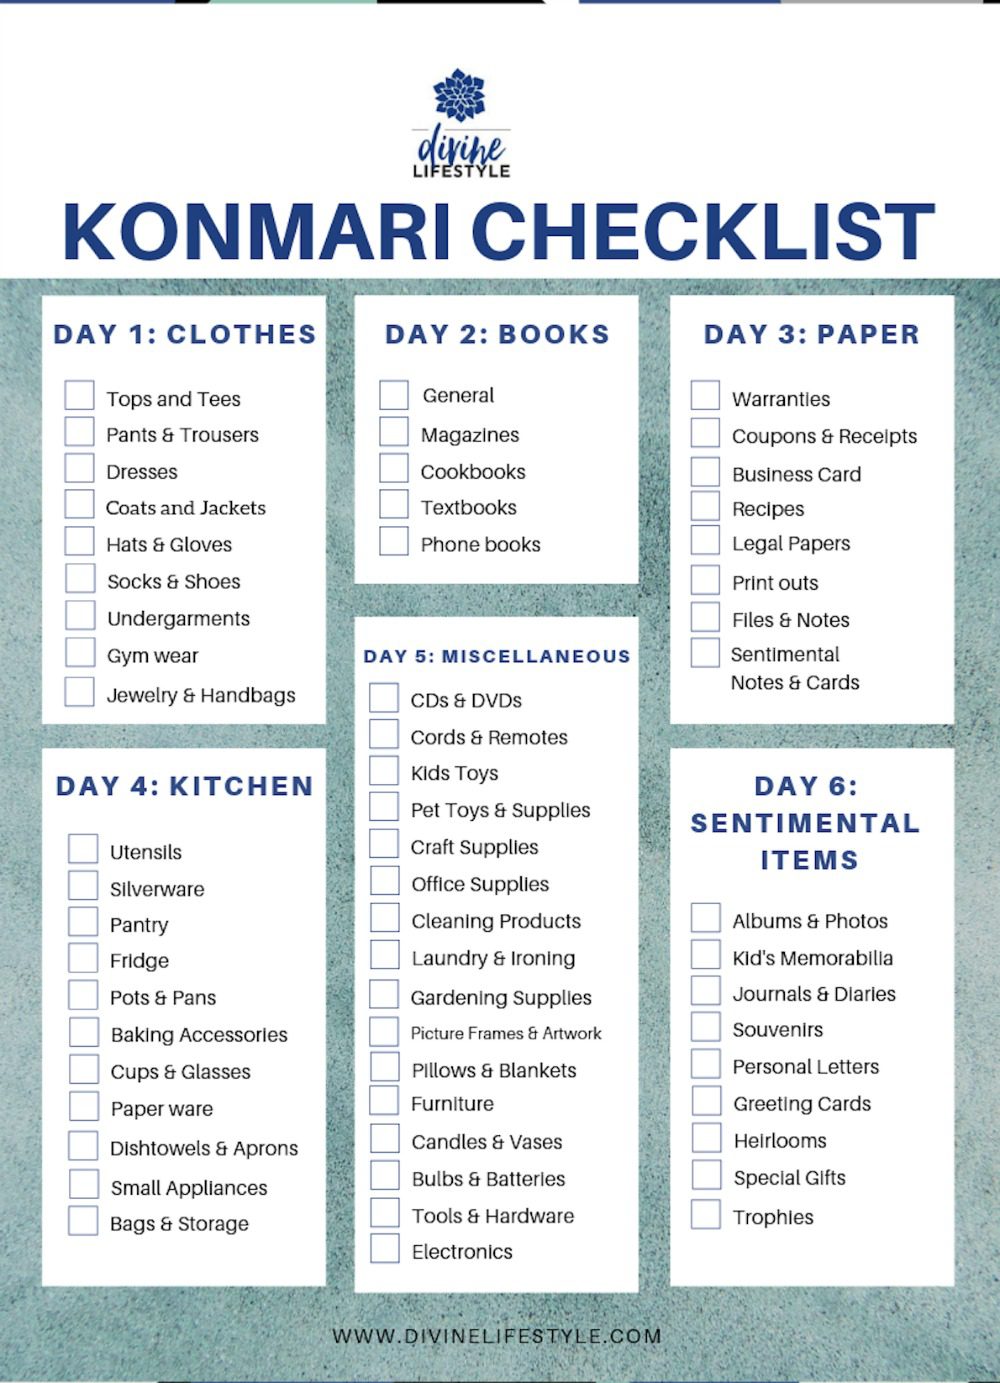 6 Basic Rules Of Tidying Up From The Konmari Method By Marie Kondo